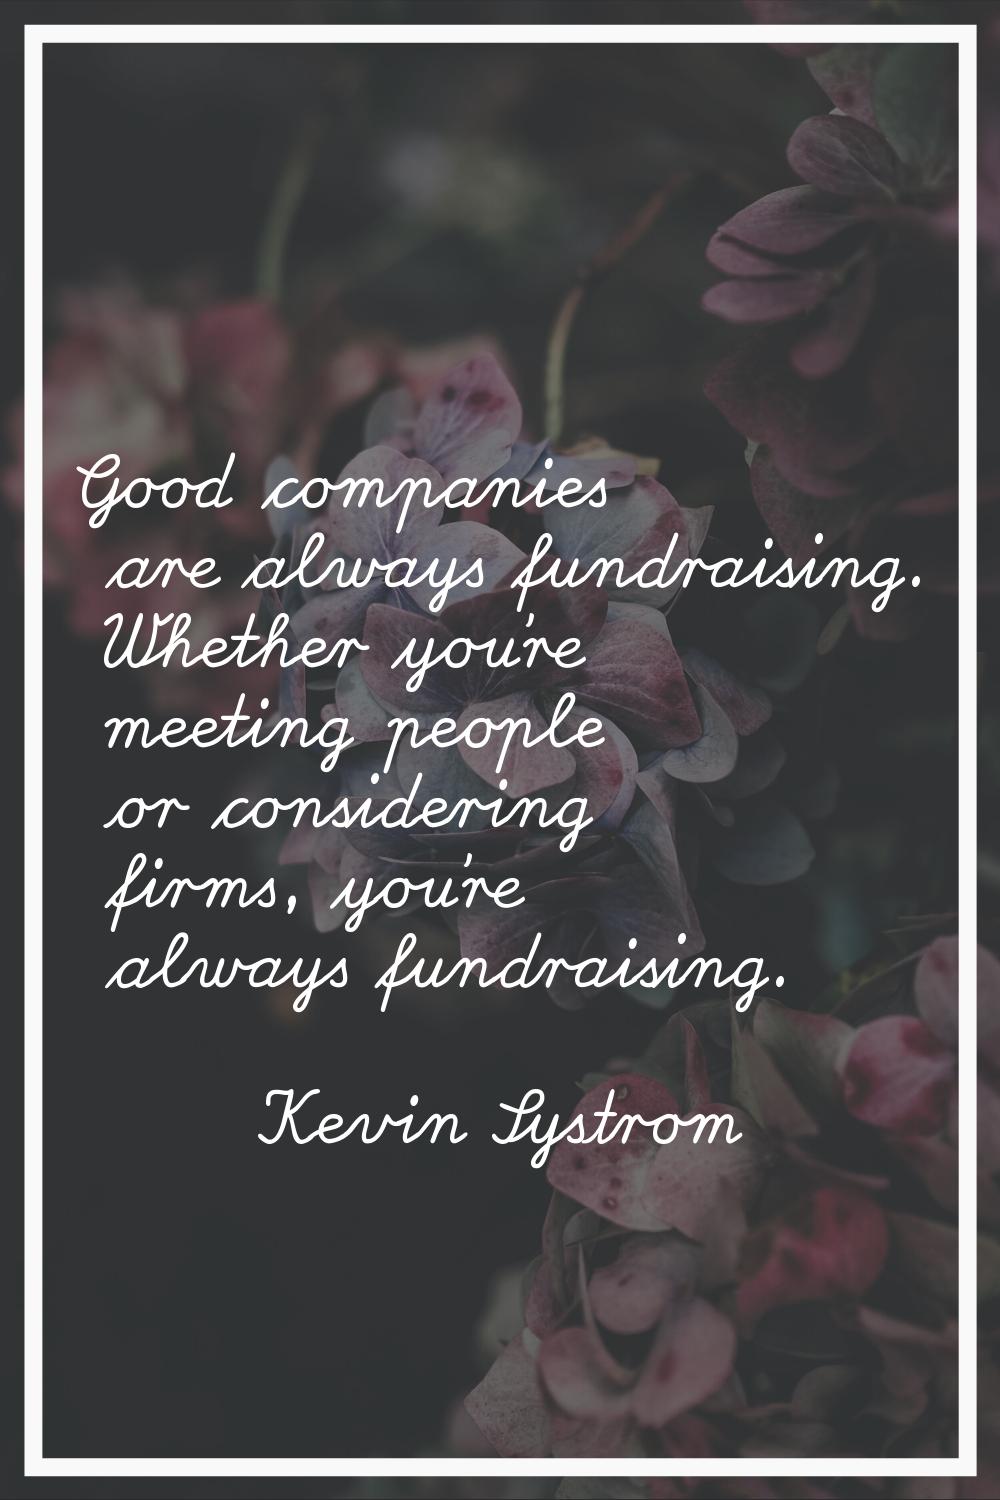 Good companies are always fundraising. Whether you're meeting people or considering firms, you're a